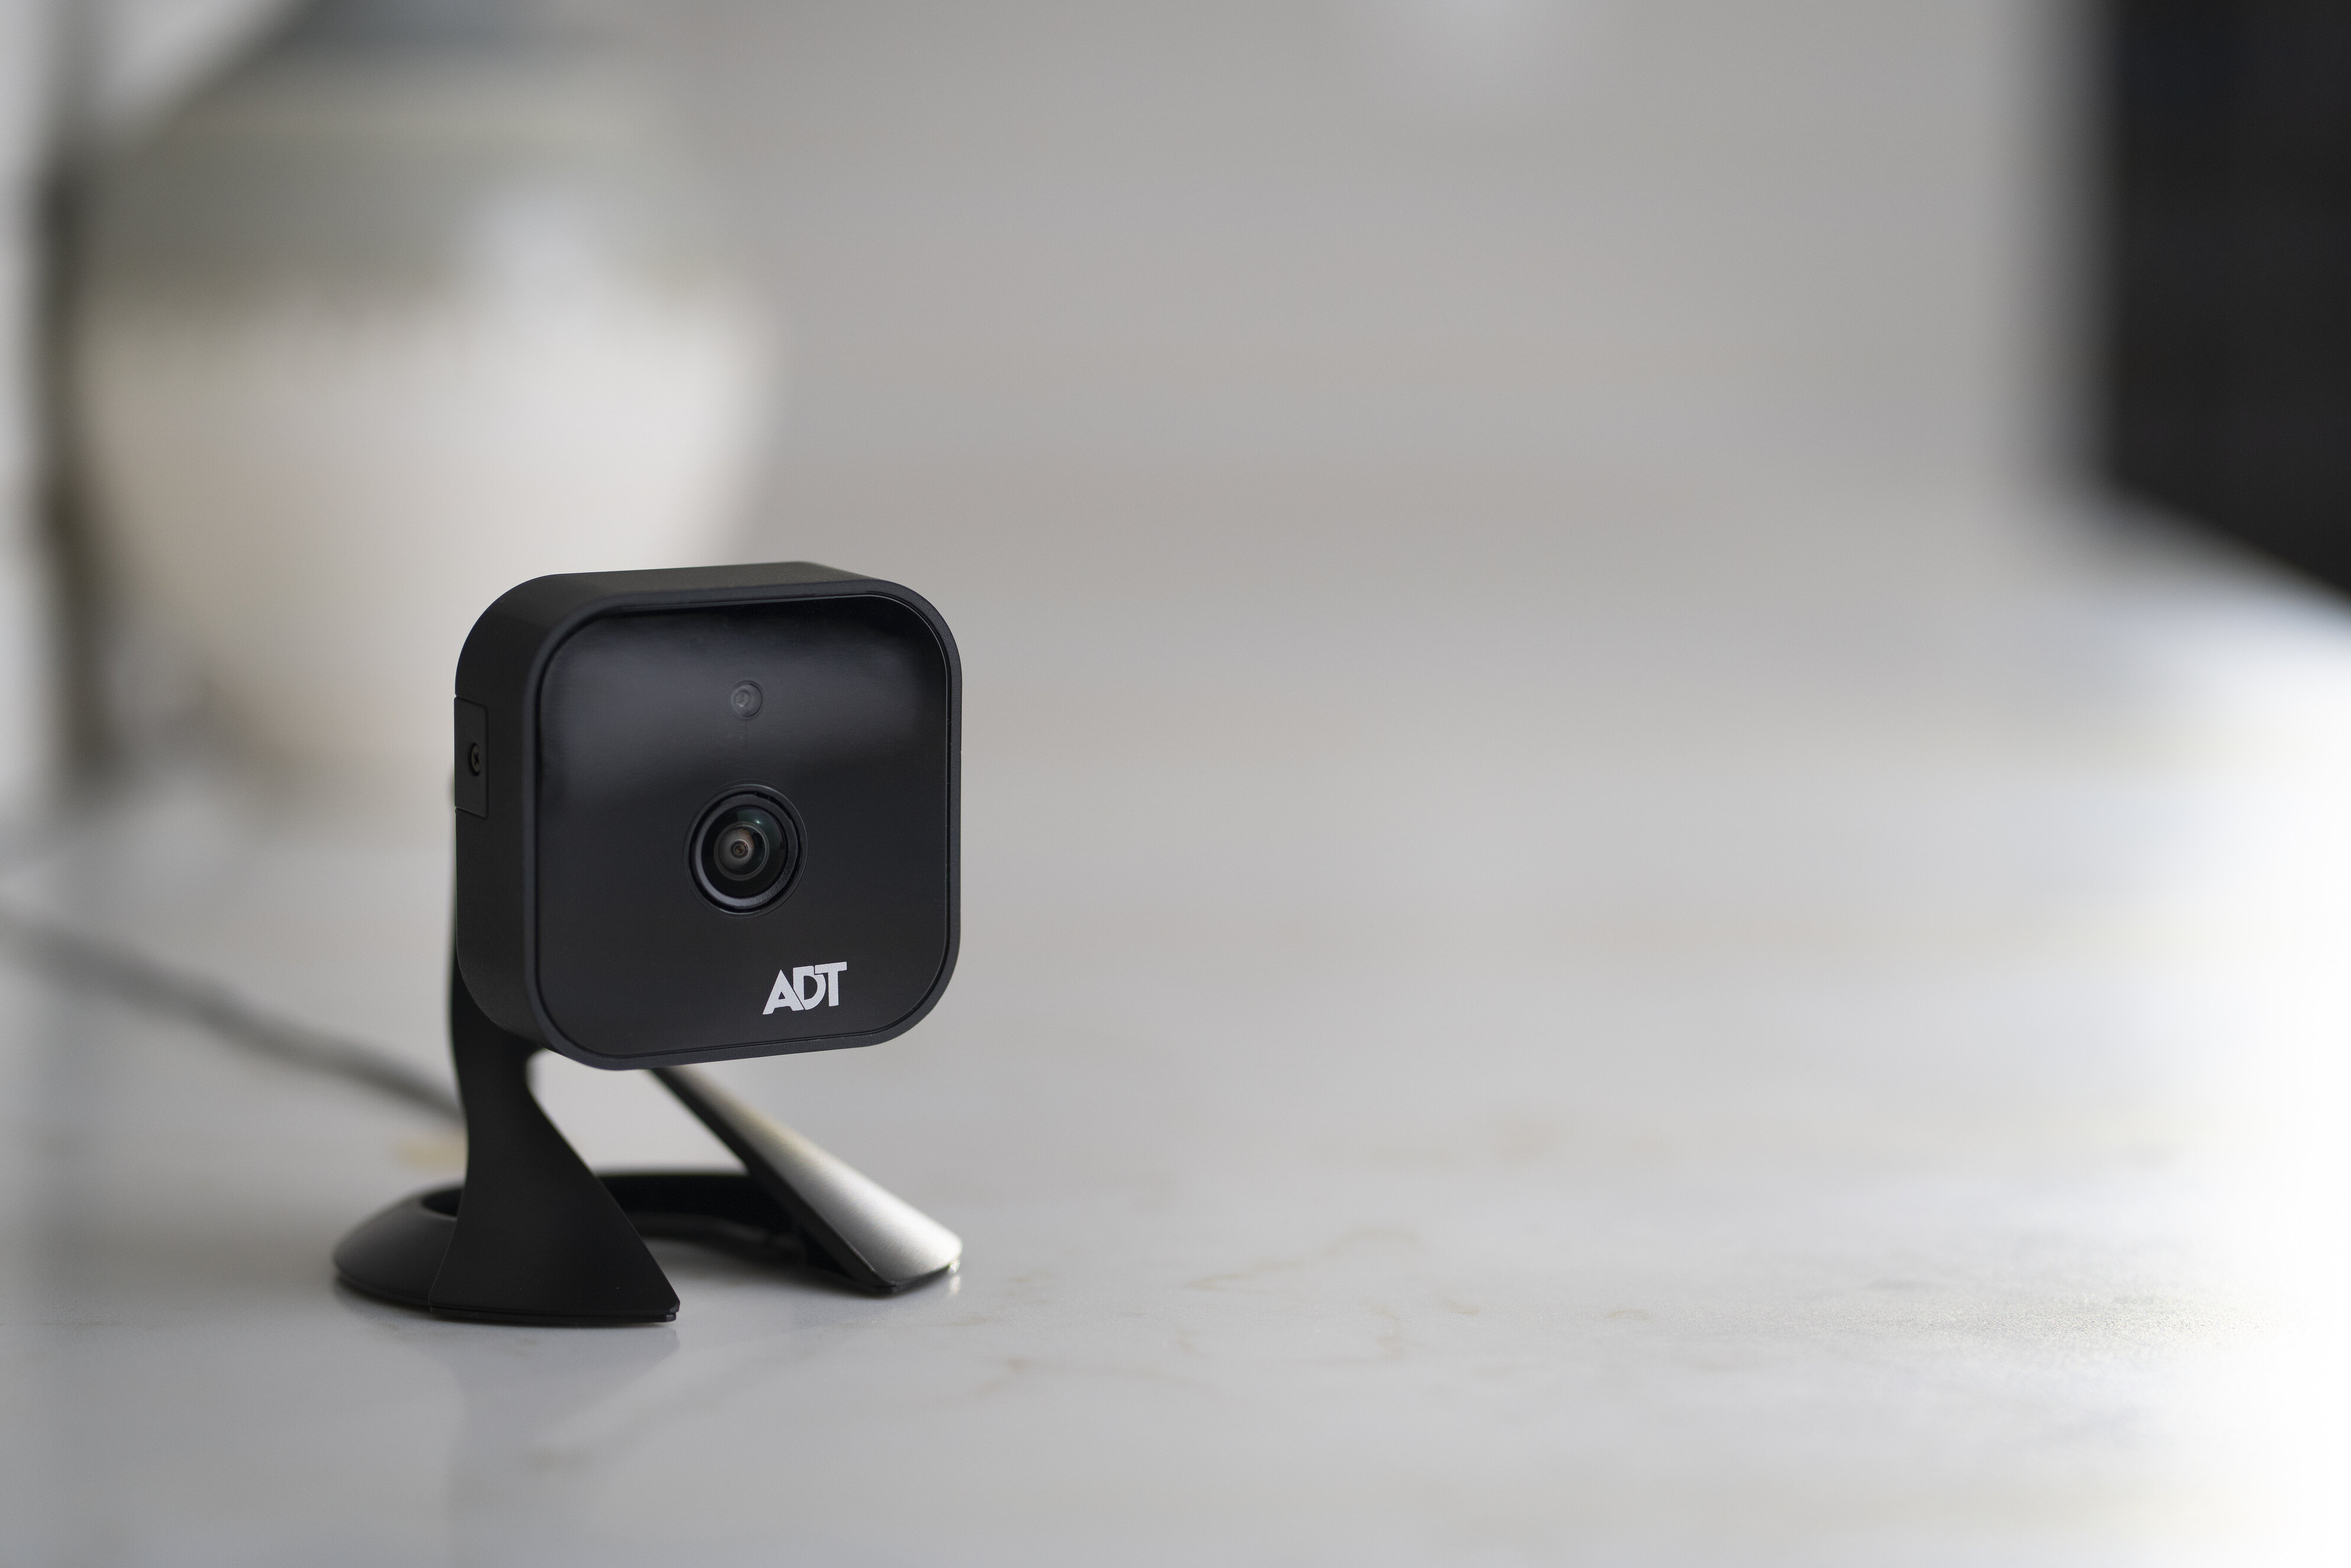 An ADT security camera sits on a gray countertop in a home